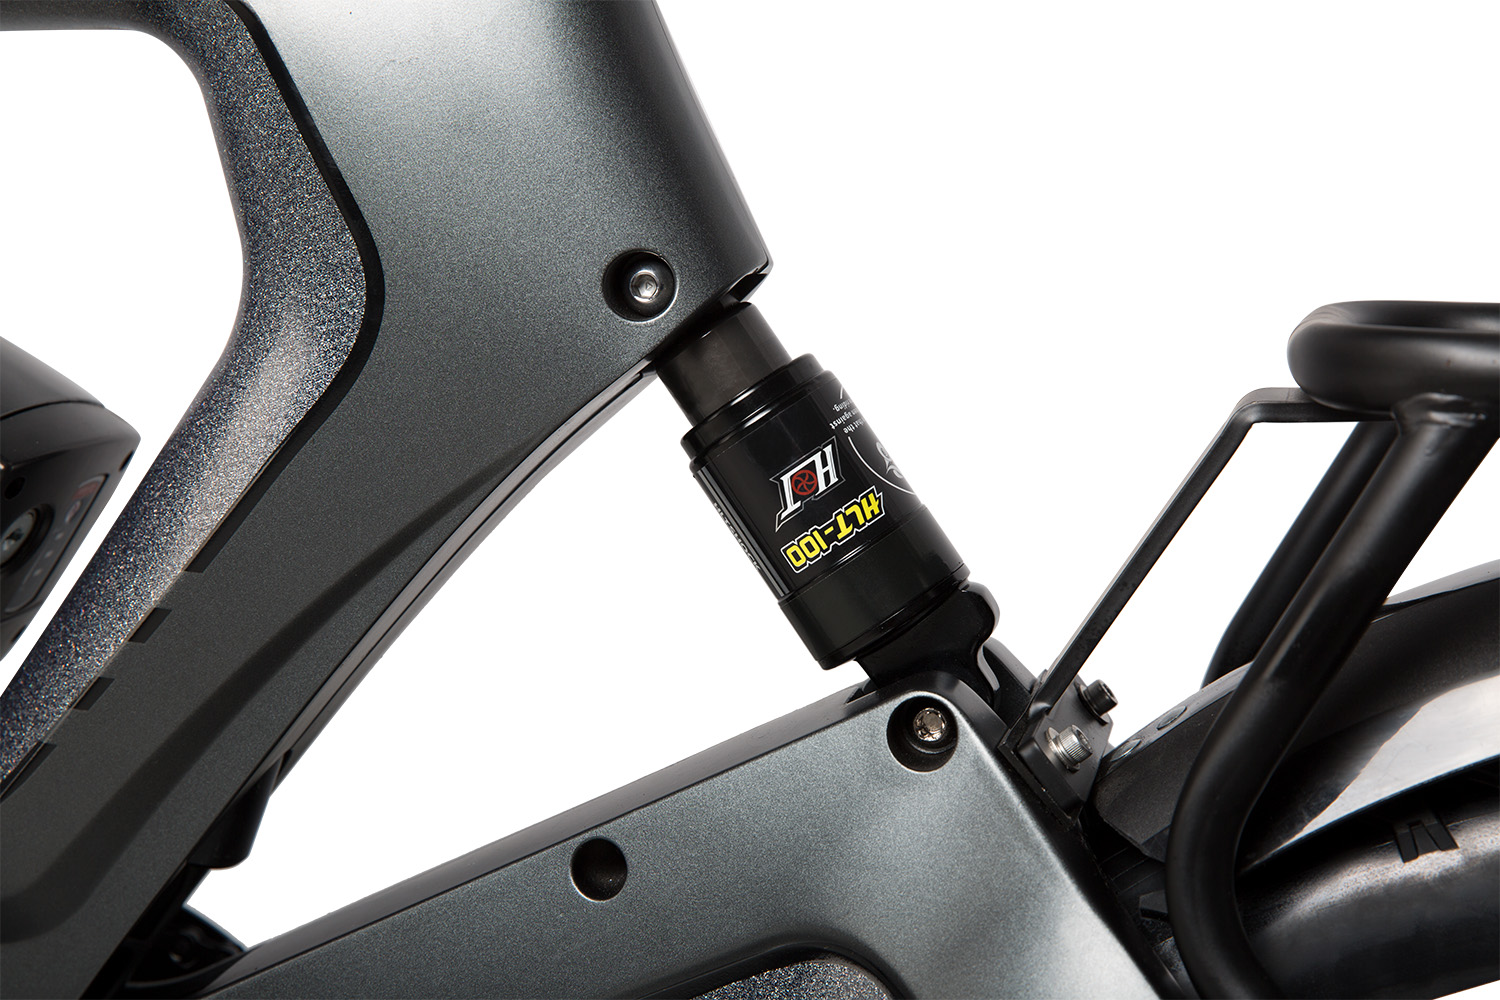 The rear shock absorber with front fork shock makes K6F have the ultimate shock absorption ability.